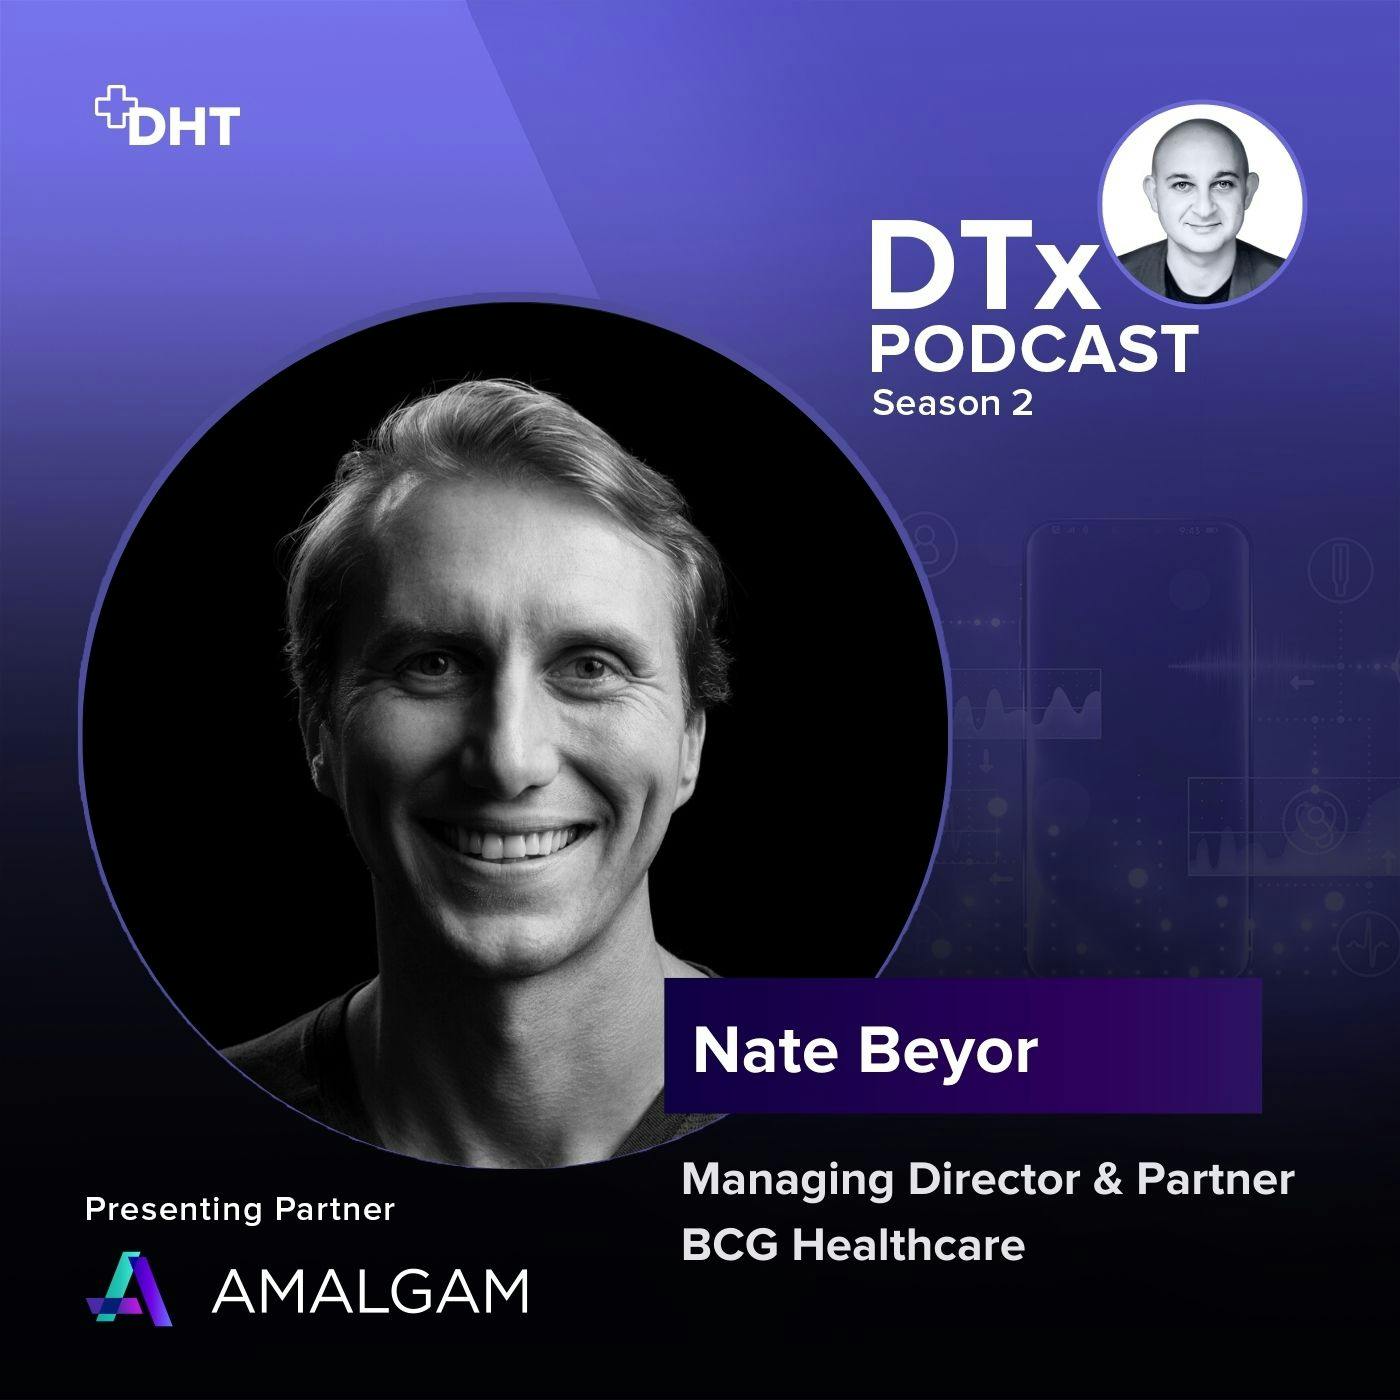 Taking DTx to Market: Nate Beyor Gives Insights On Building Teams and Products